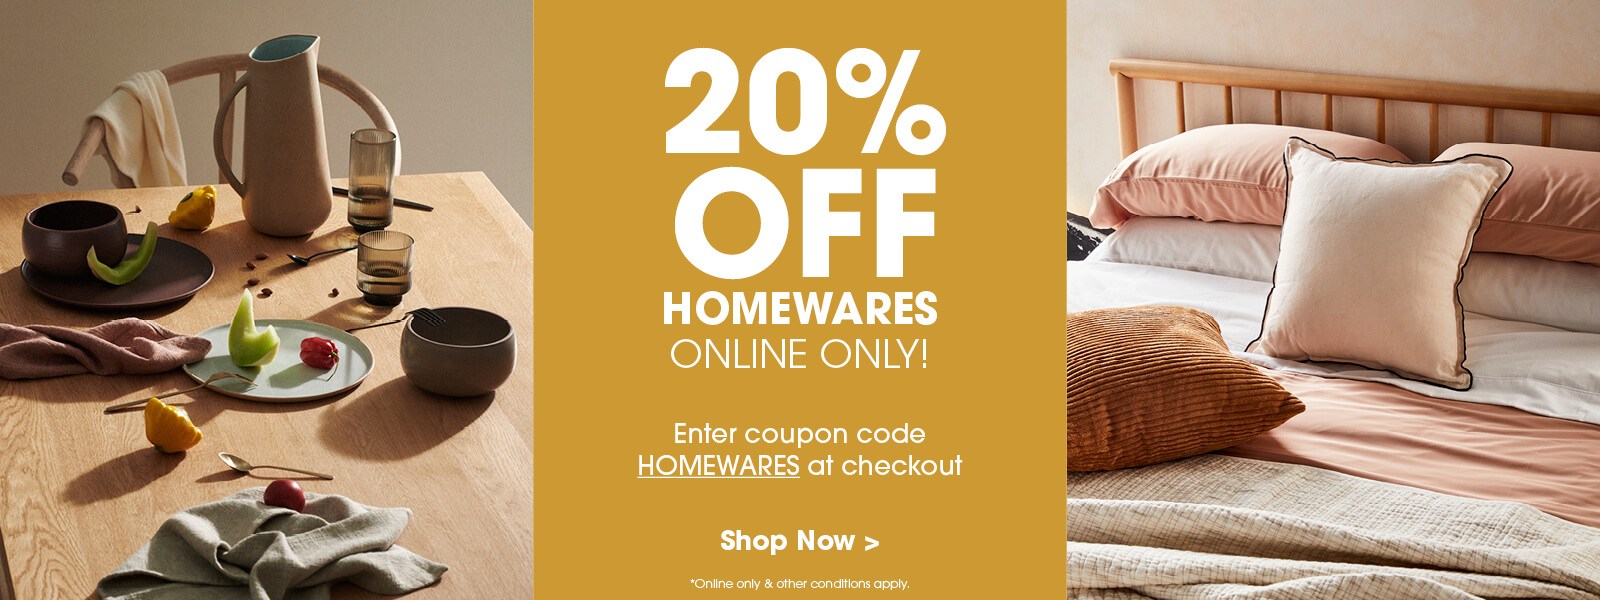 Extra 20% OFF on homewares